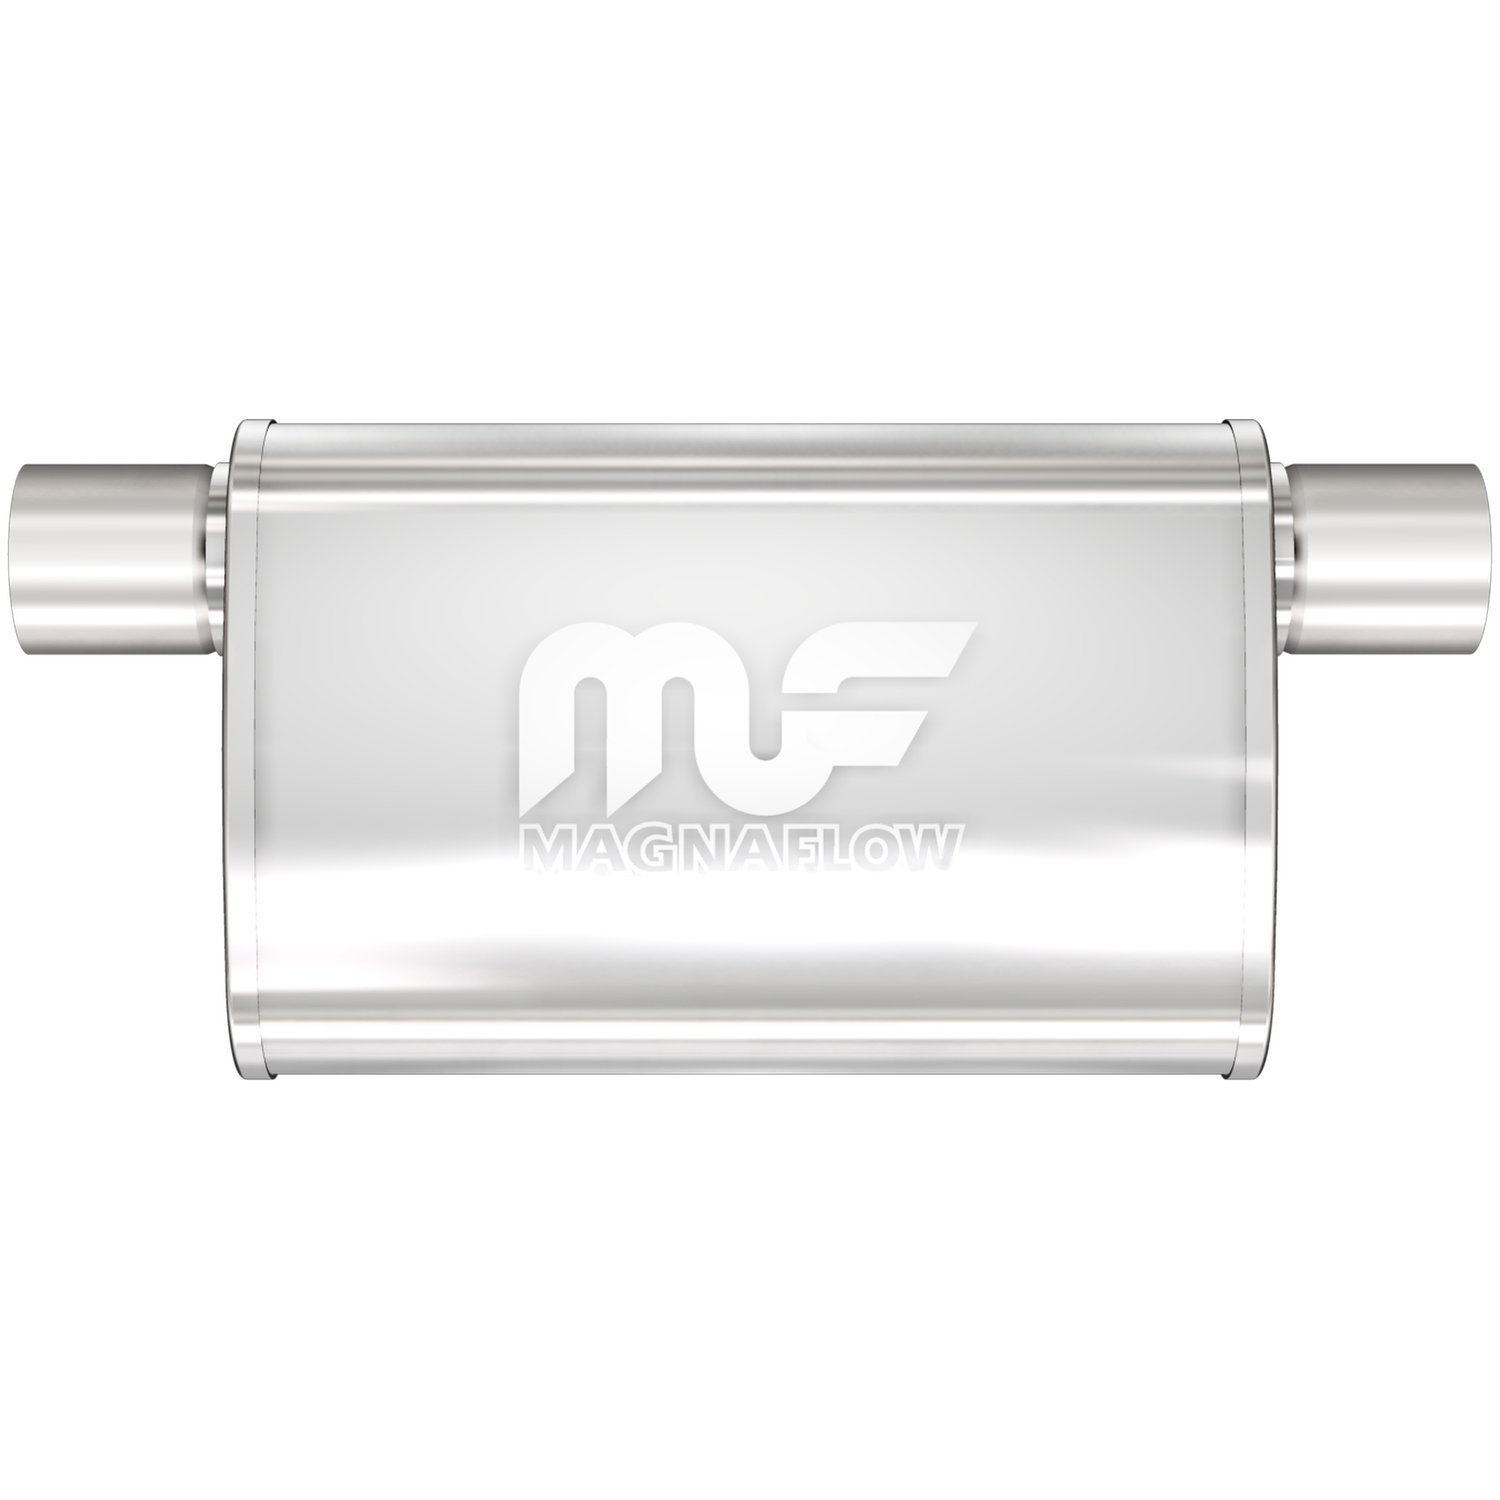 4" x 9" Oval Muffler Offset In/Offset Out: 2.5" Body Length: 11" Overall Length: 17" Core Size: 2.5" Satin Finish